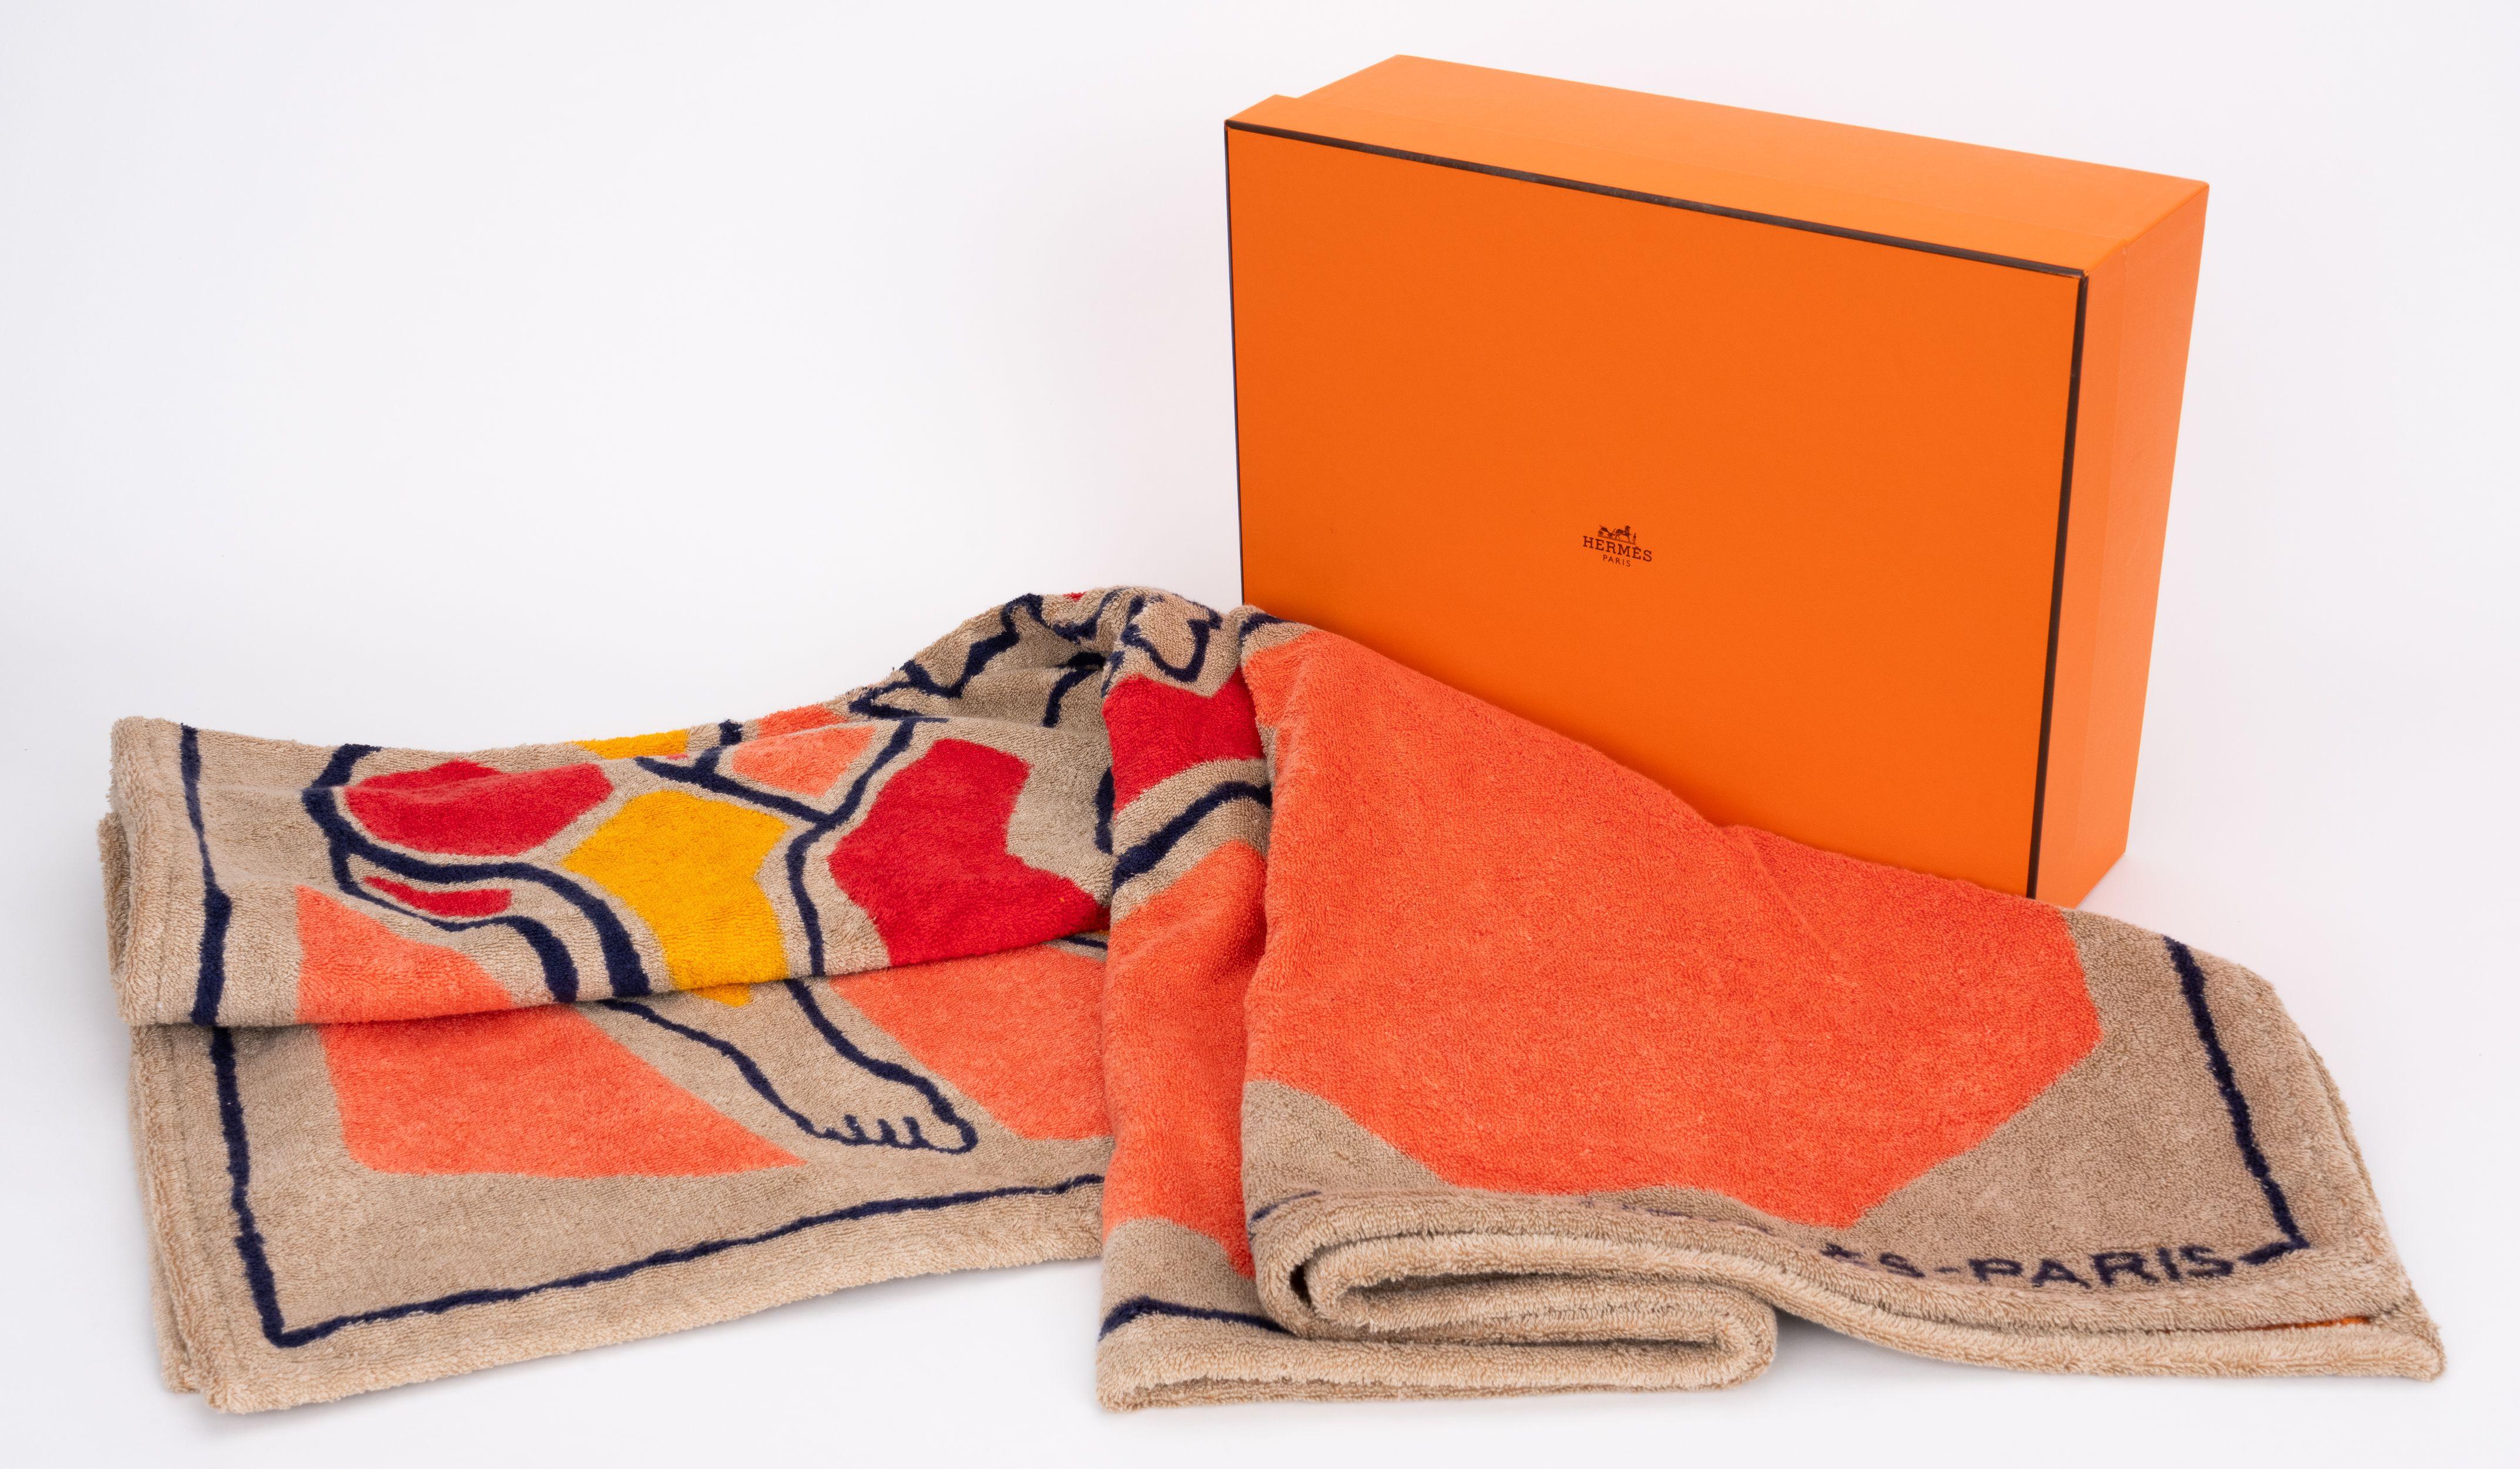 Hermès beach towel with geometric horse and figure design. Orange, taupe and black color combination. 100% cotton. Comes with original box.